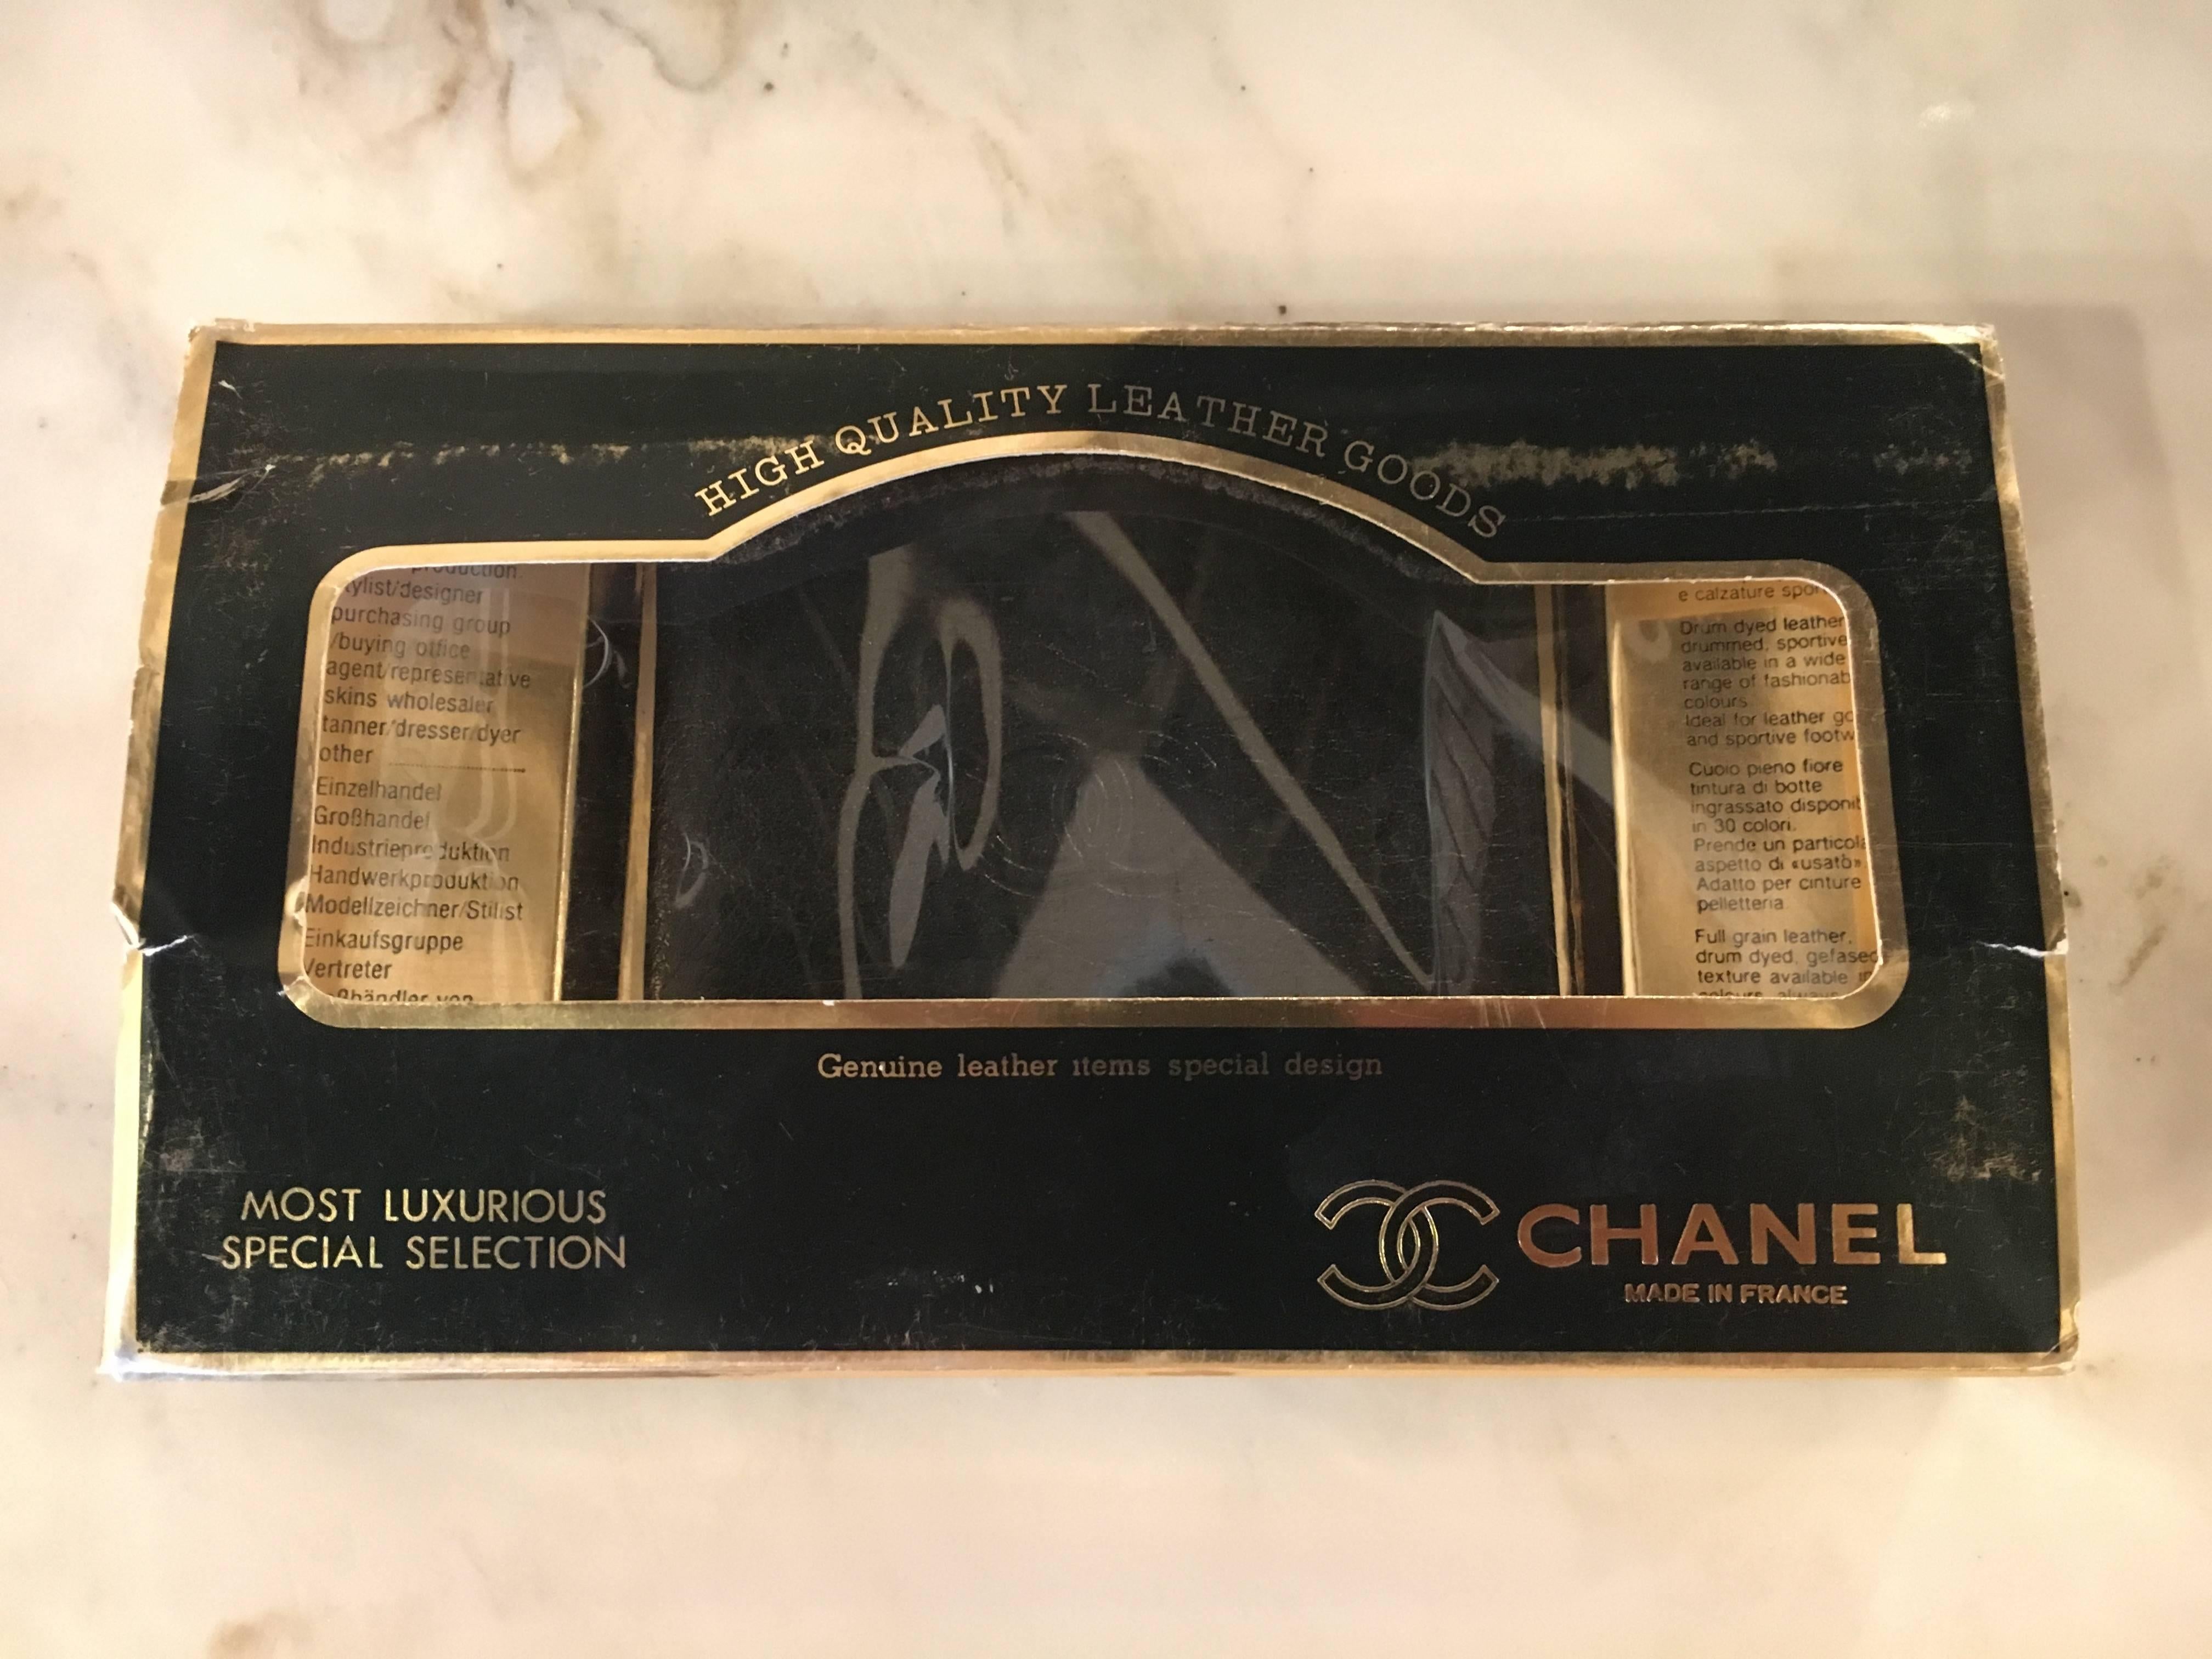 Brand new Chanel men’s wallet in a black leather - vintage. This once popular folding billfold is in pristine condition and is a rare find having its original box.
Unfolded is 8.75 inches wide. A Fine gift for any man on any occasion.